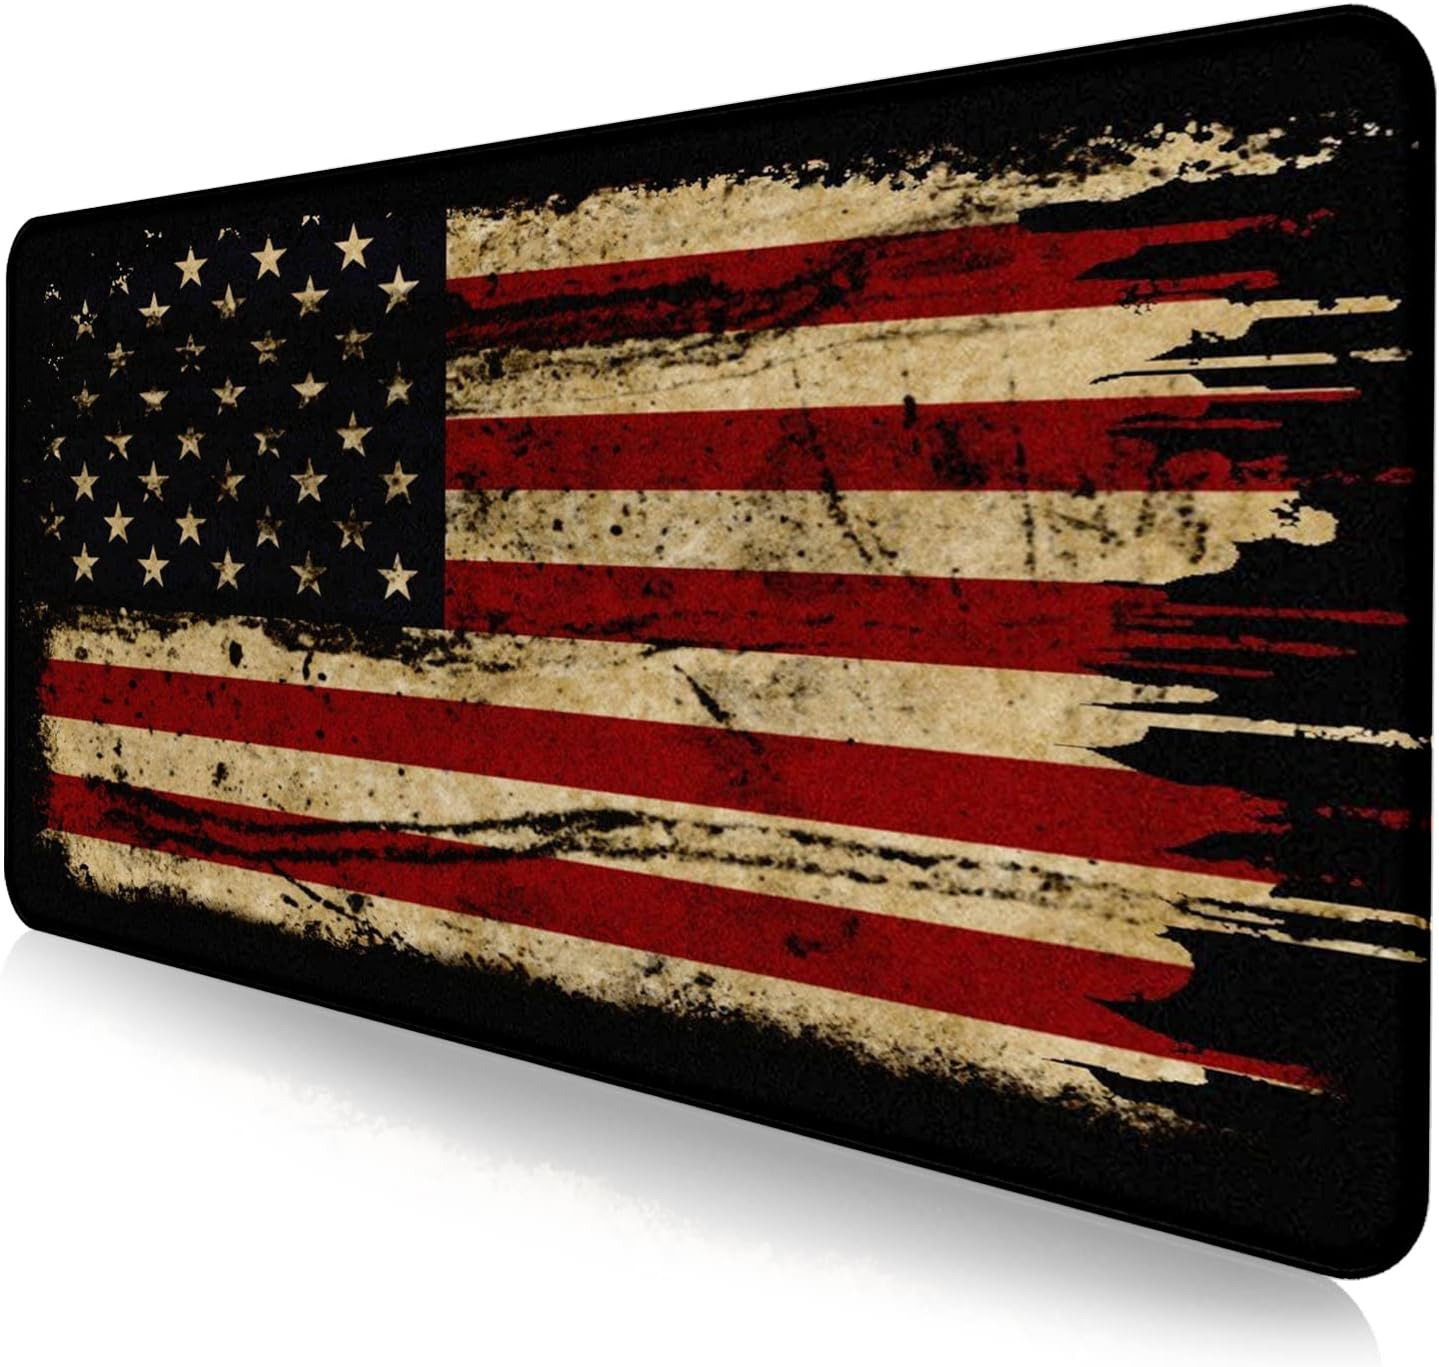 Large Extended Gaming Mouse Pad with Stitched Edges, Non-Slip Waterproof Rubber 